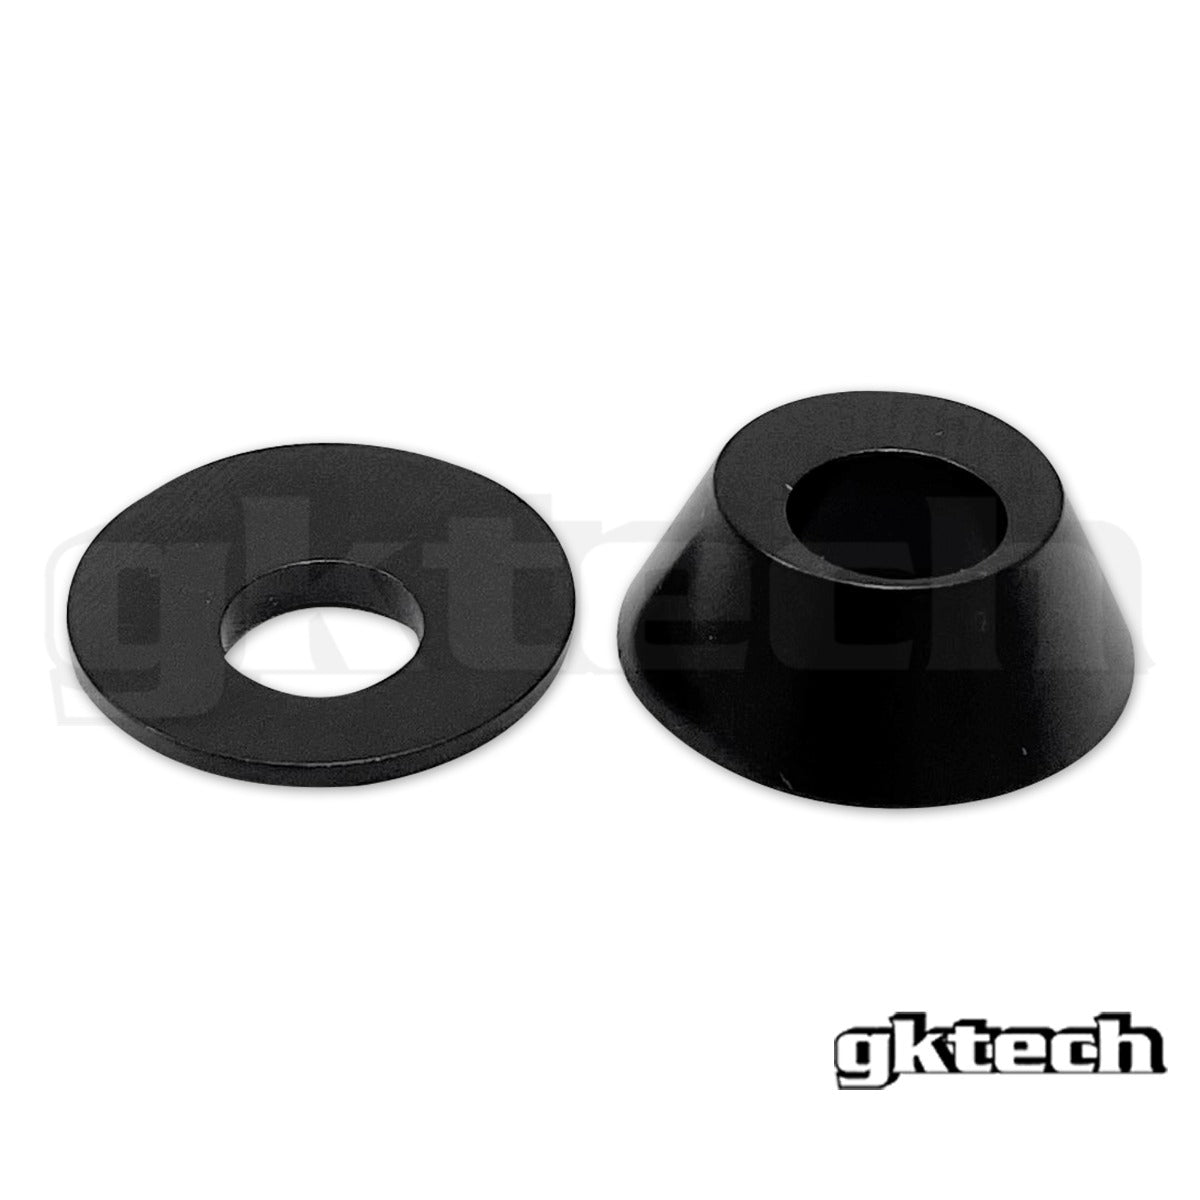 S chassis pro drift knuckle ackerman adjustable inserts